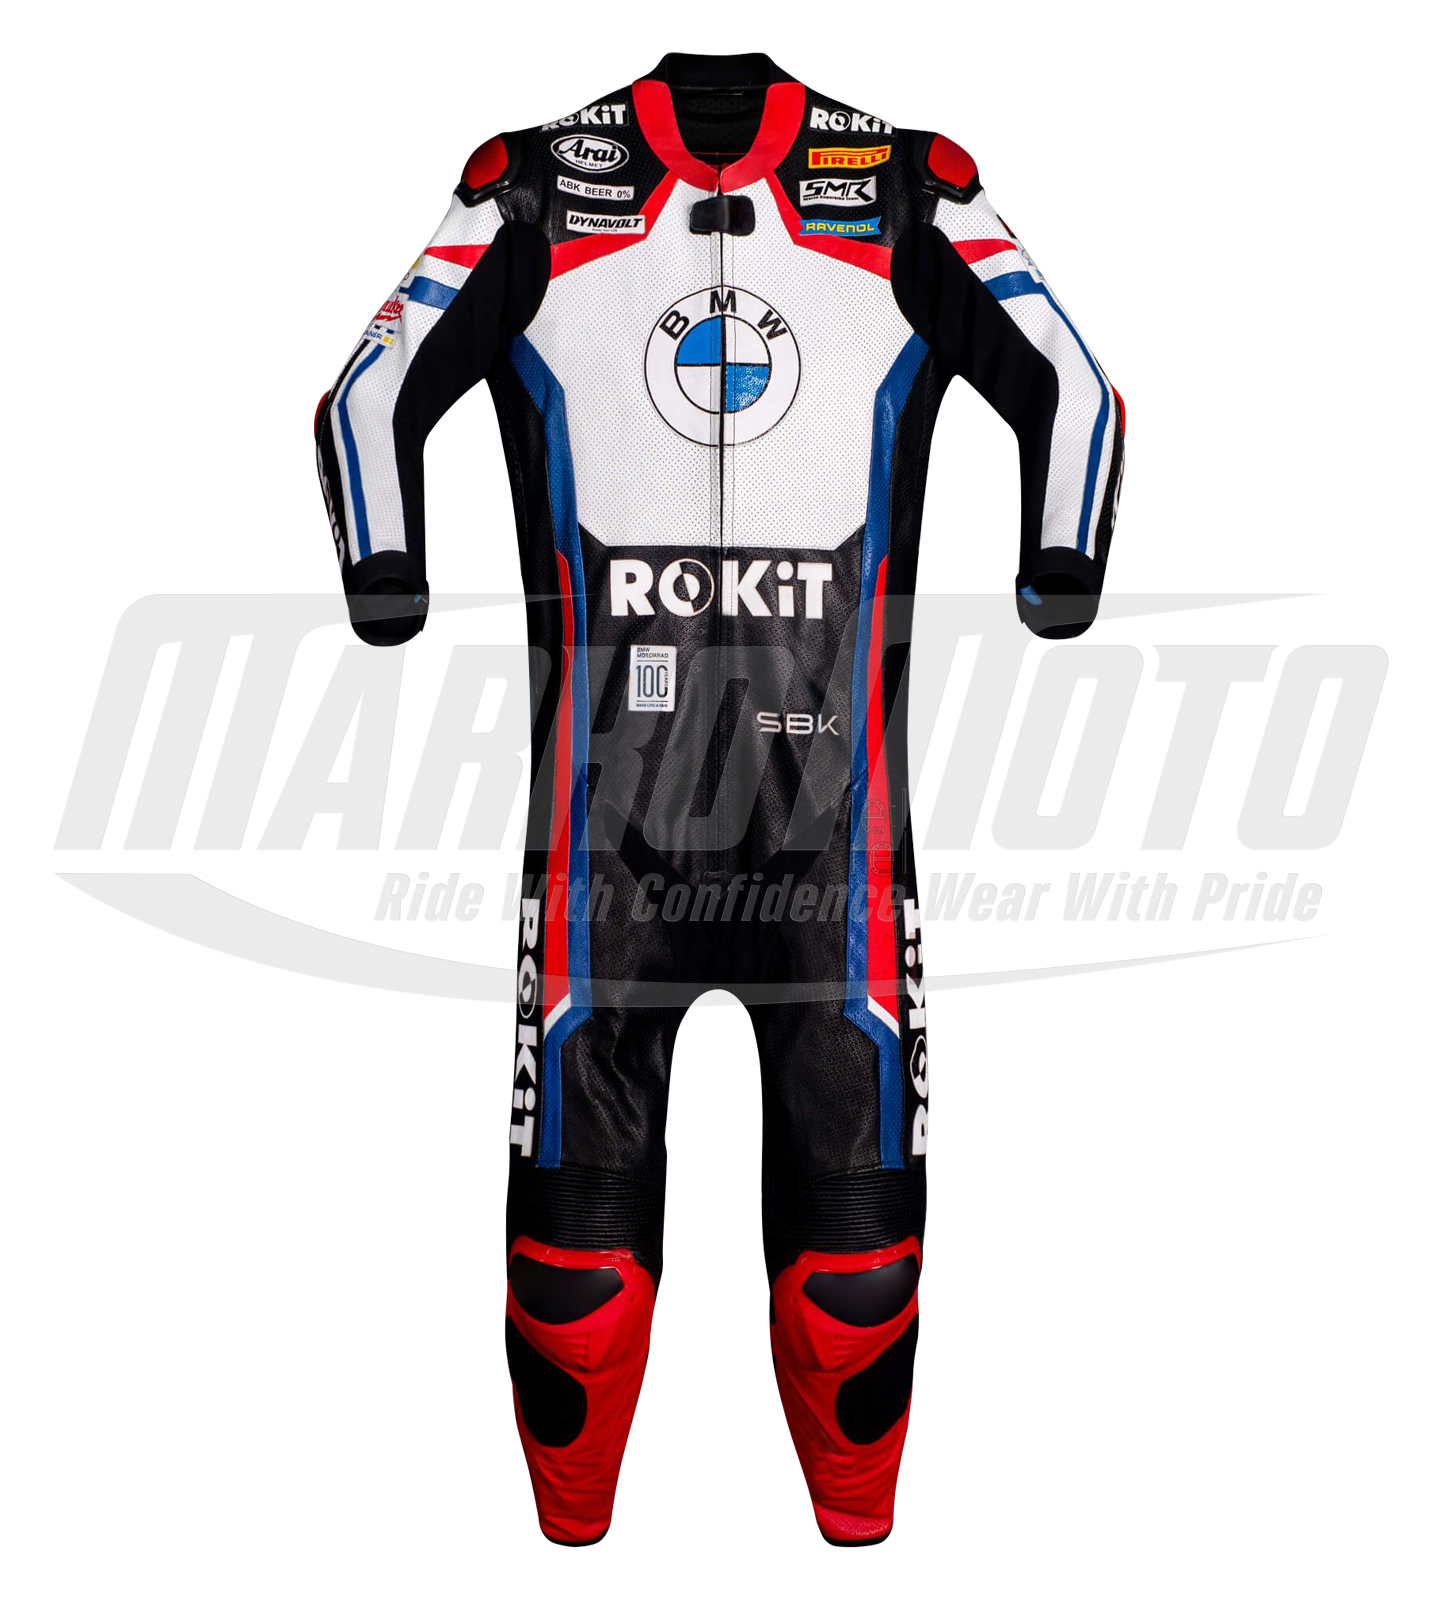 Miguel Oliveira Race Suit for Street Riding Winter Test 2022 Motorcycle Race Suits 1pc & 2pcs